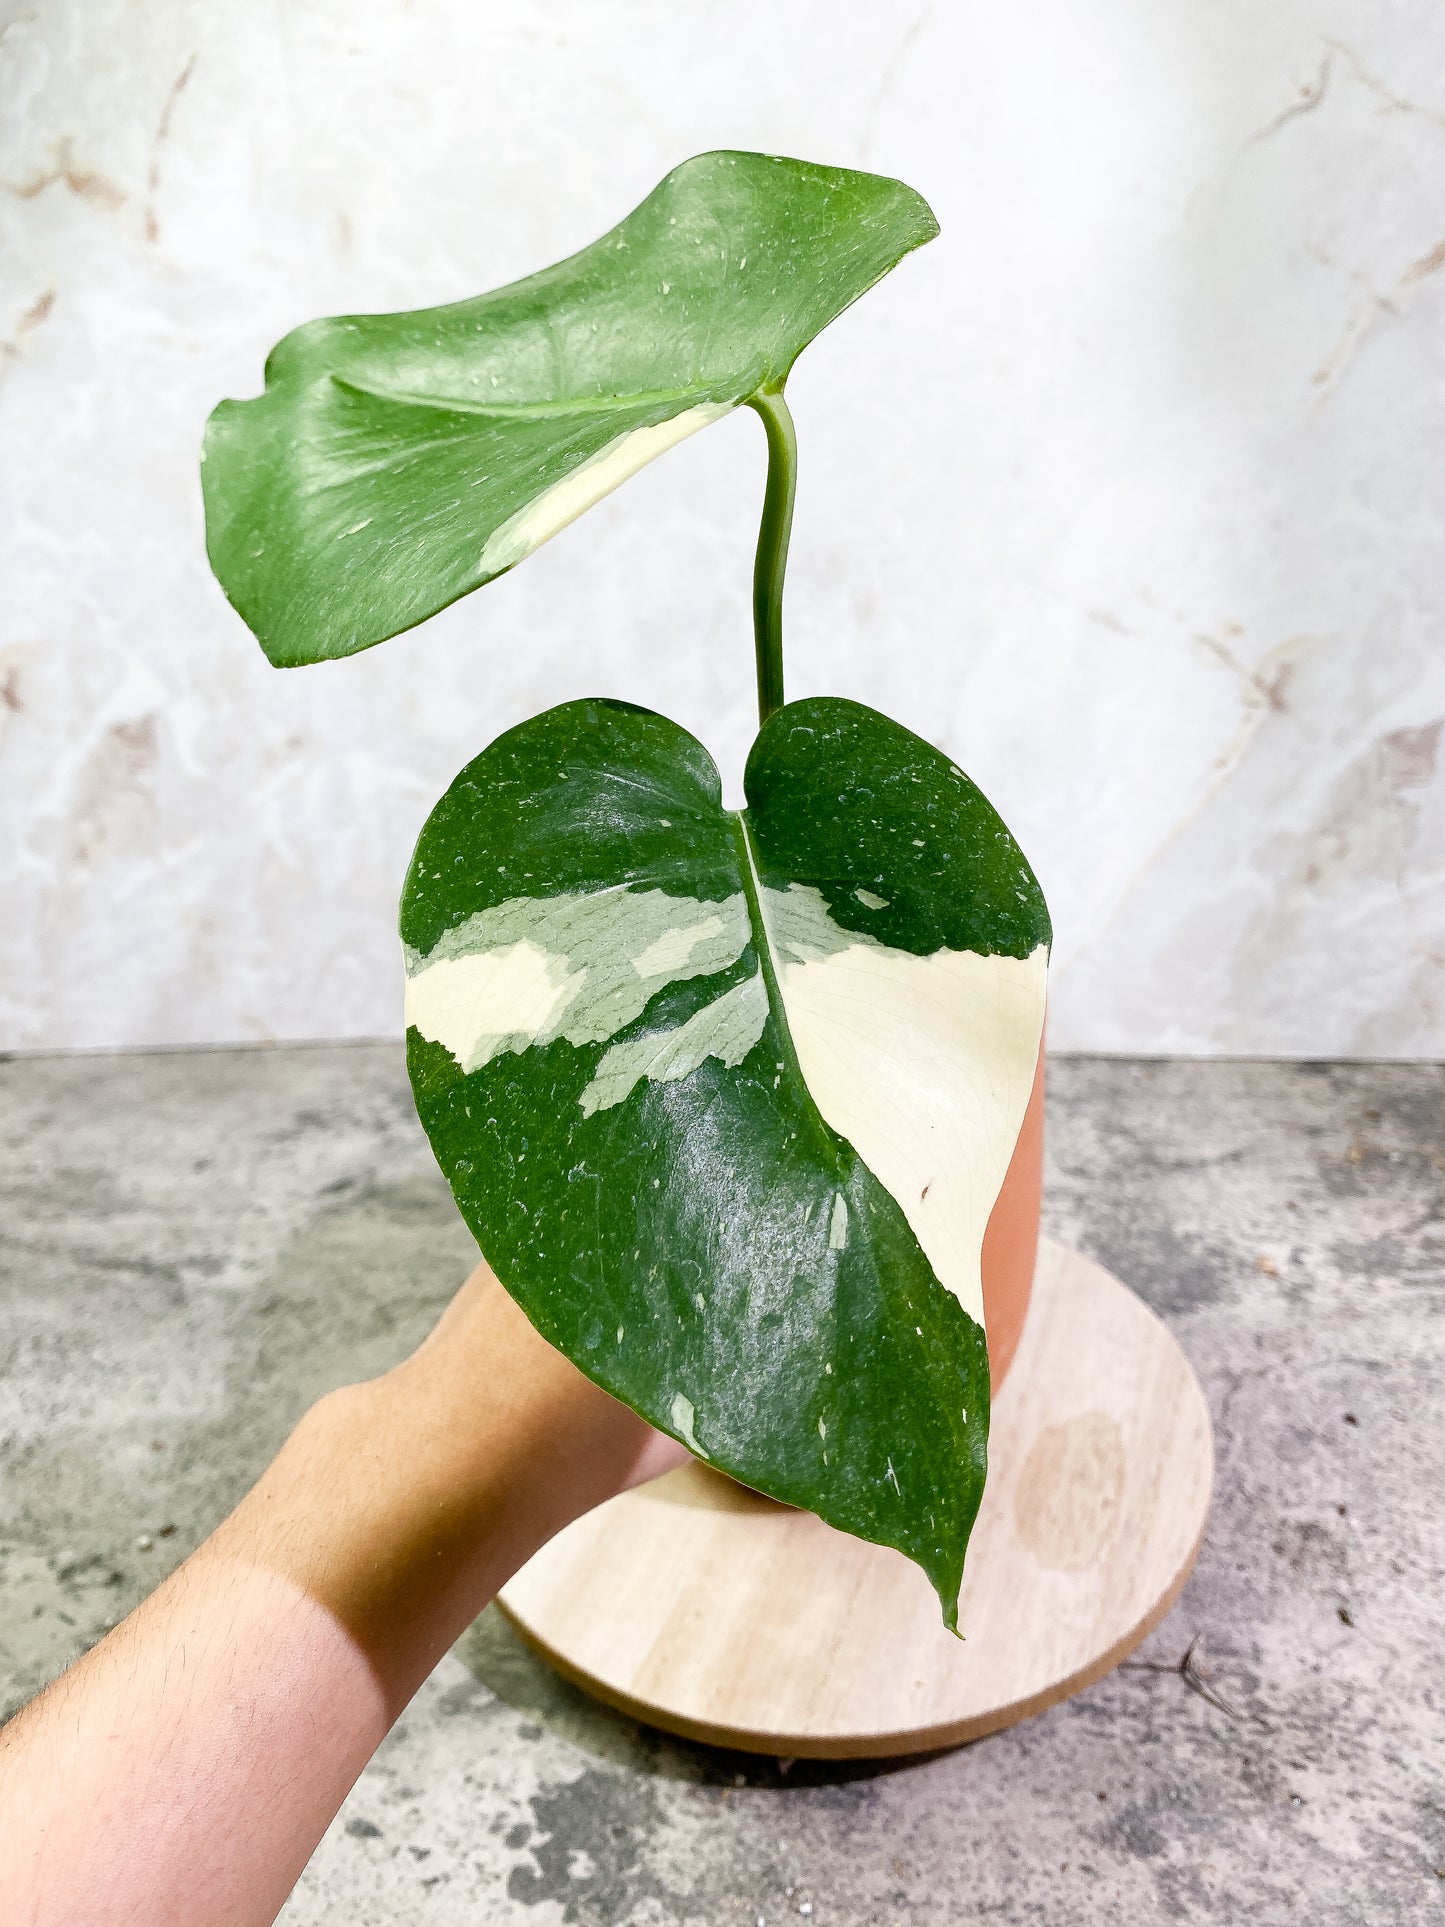 Monstera Thai Constellation 2 leaves Rooting top cutting